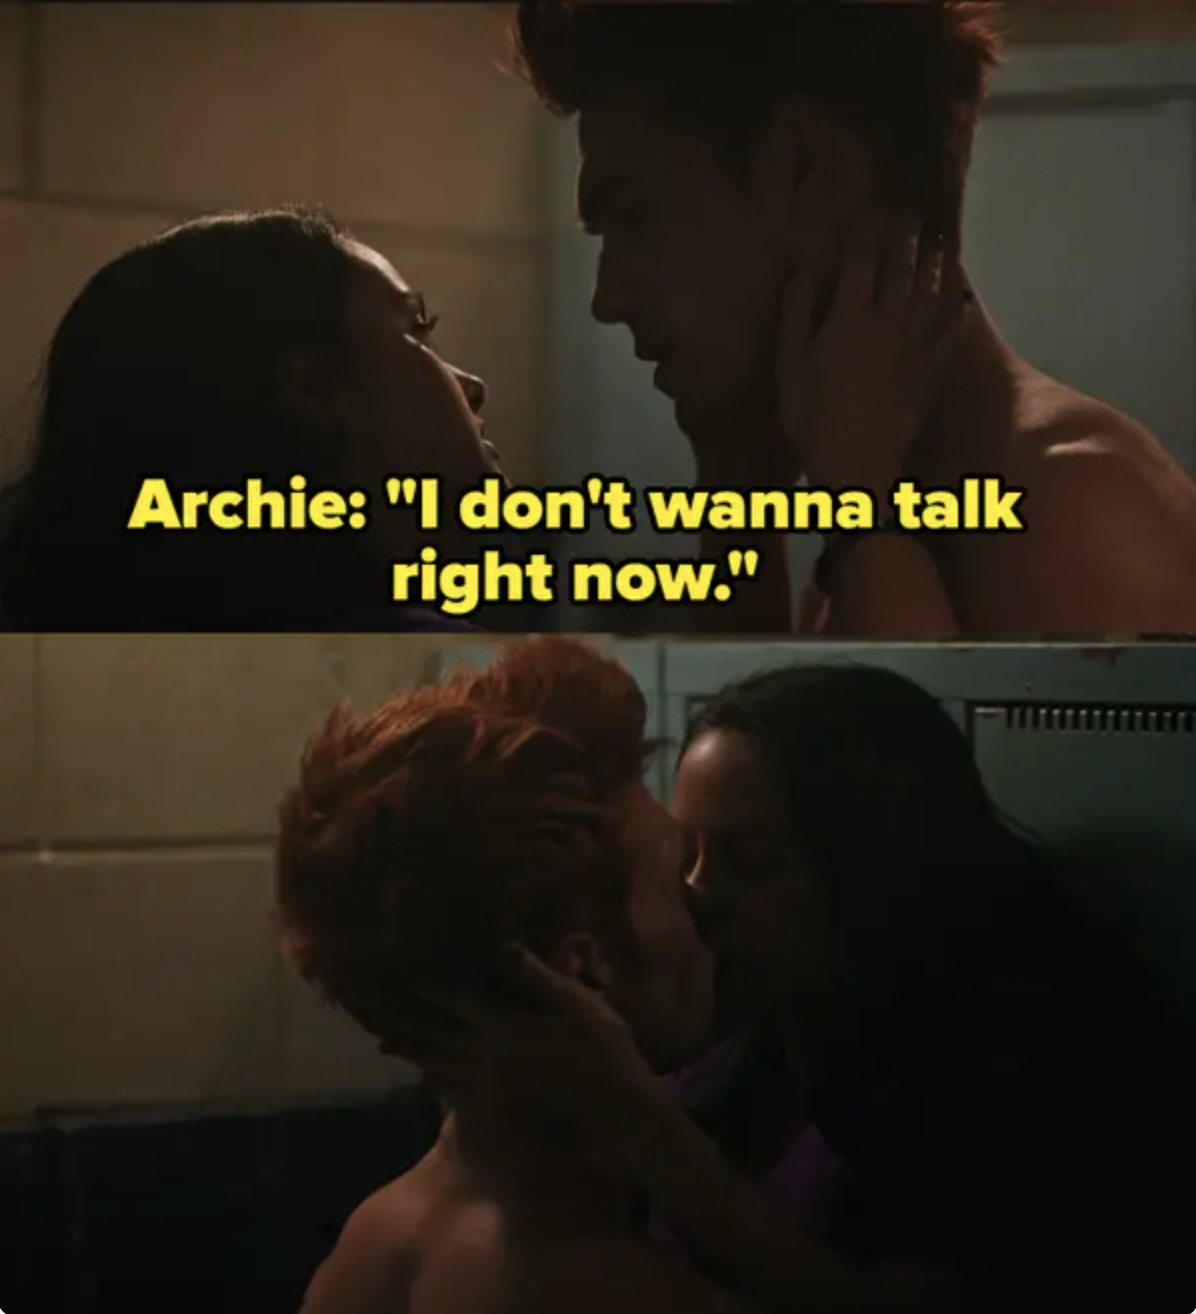 Archie and Veronica have a quickie in jail